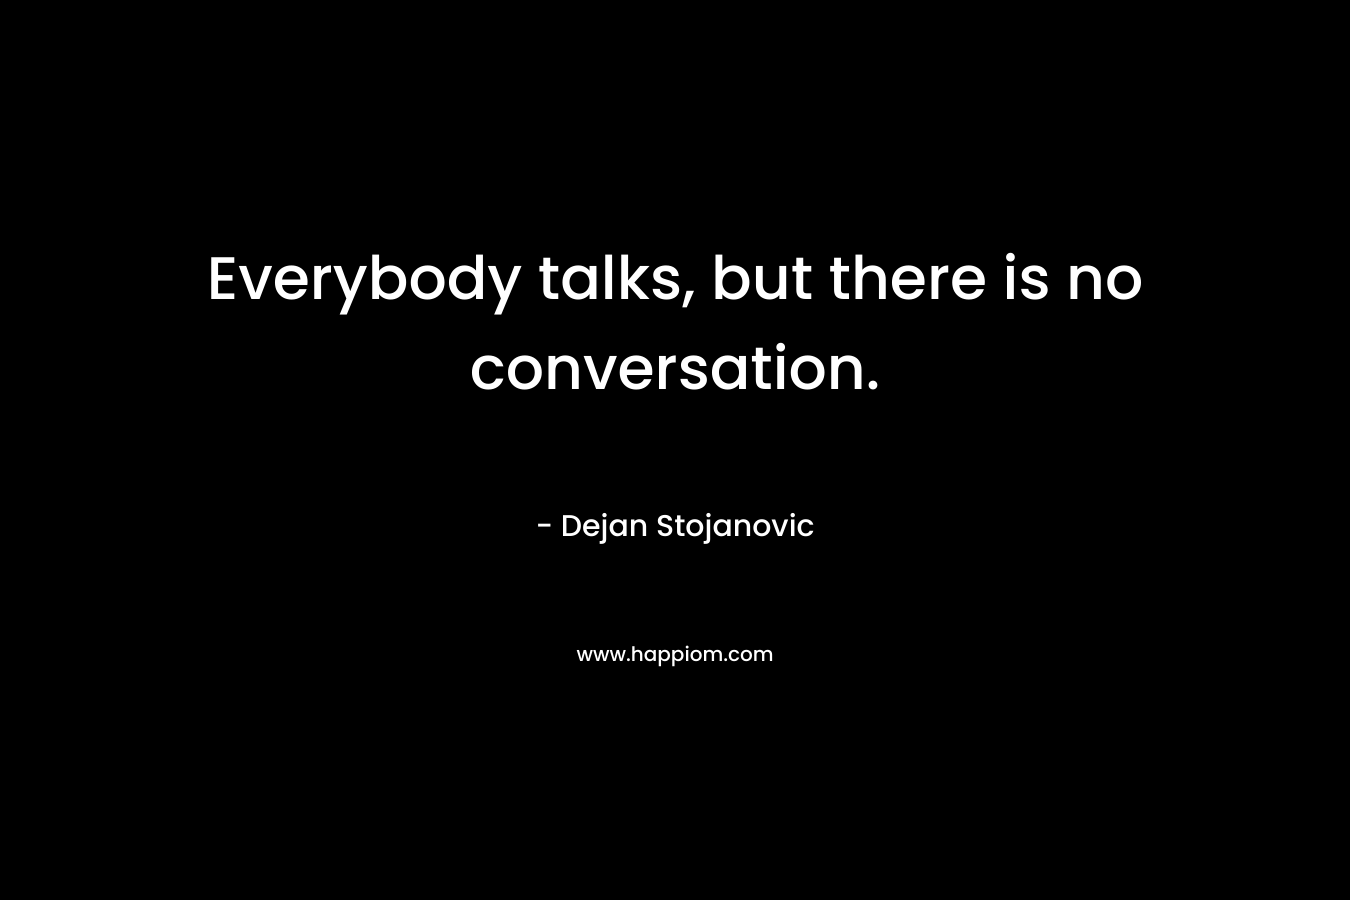 Everybody talks, but there is no conversation.